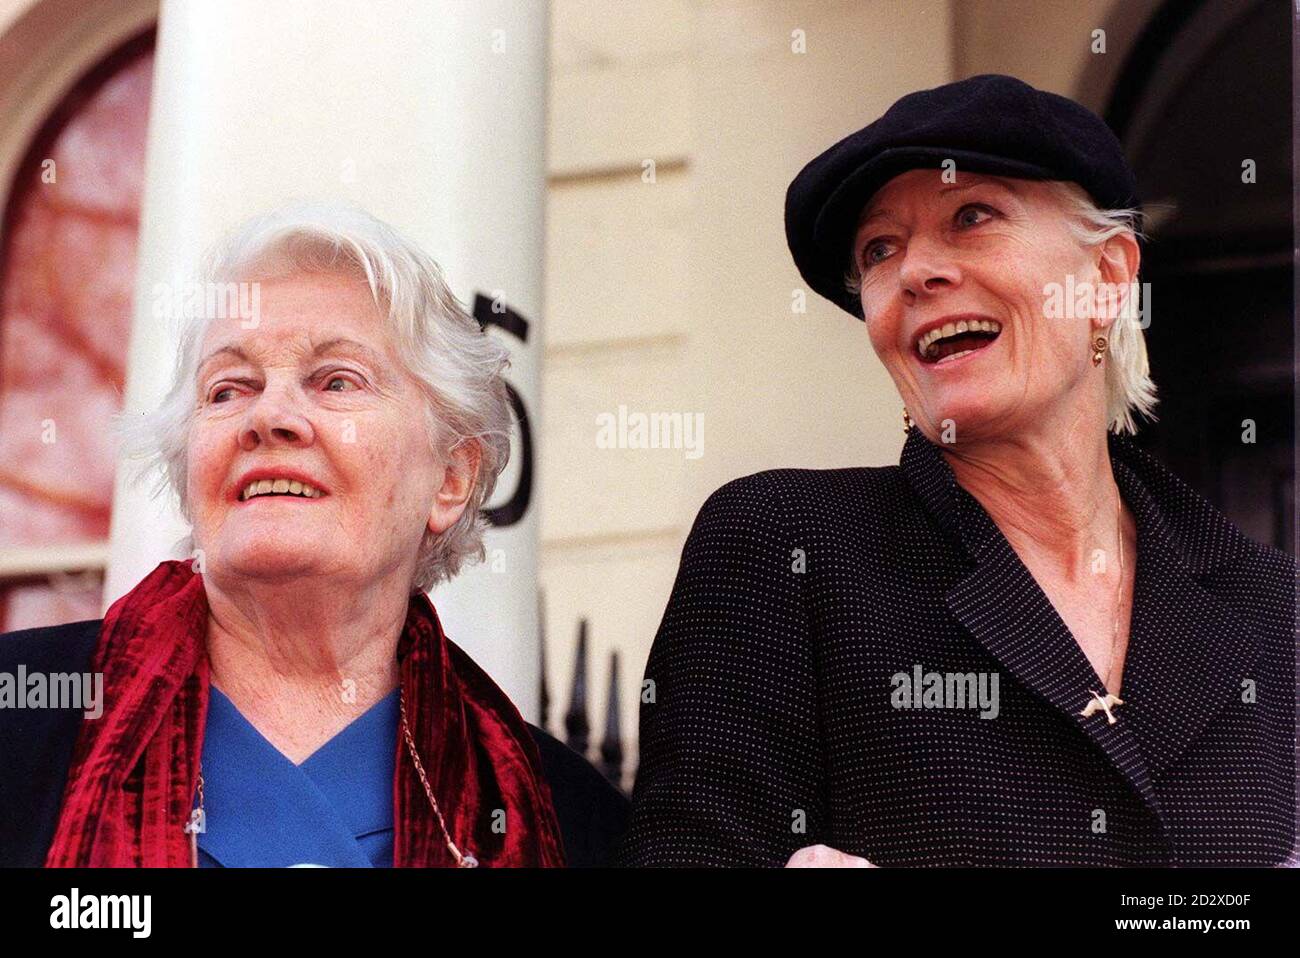 Actress Vanessa Redgrave (right) and her mother Lady Redgrave, at 54 Eaton Square, London, where Sir John Mills unveiled a special plaque to actress Vivien Leigh, famous for her role as Scarlett O'Hara in Gone with the Wind. Stock Photo